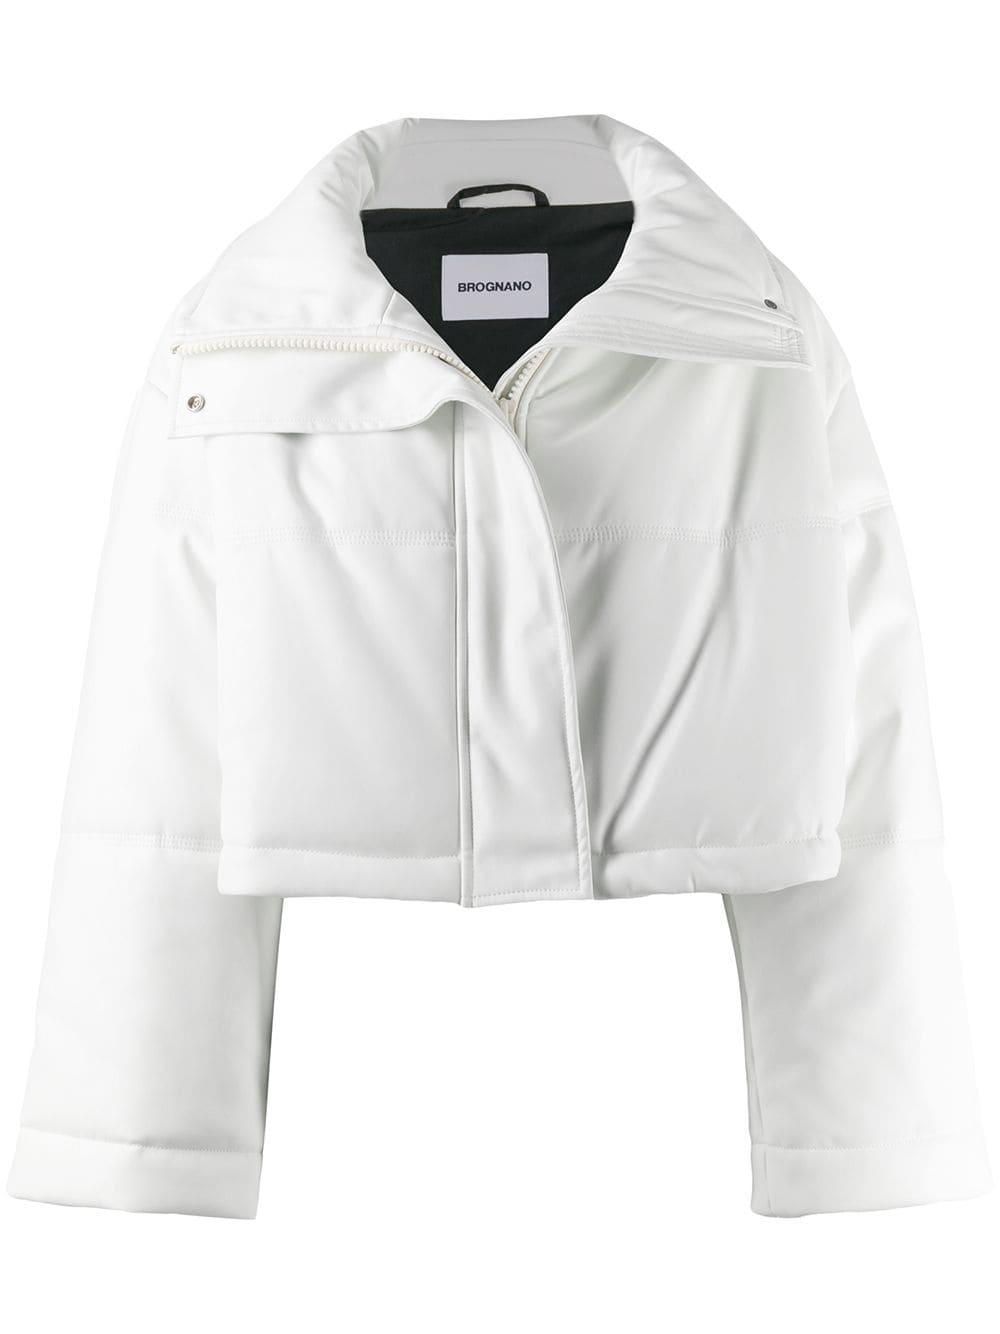 BROGNANO Cropped Puffer Jacket in White - Lyst